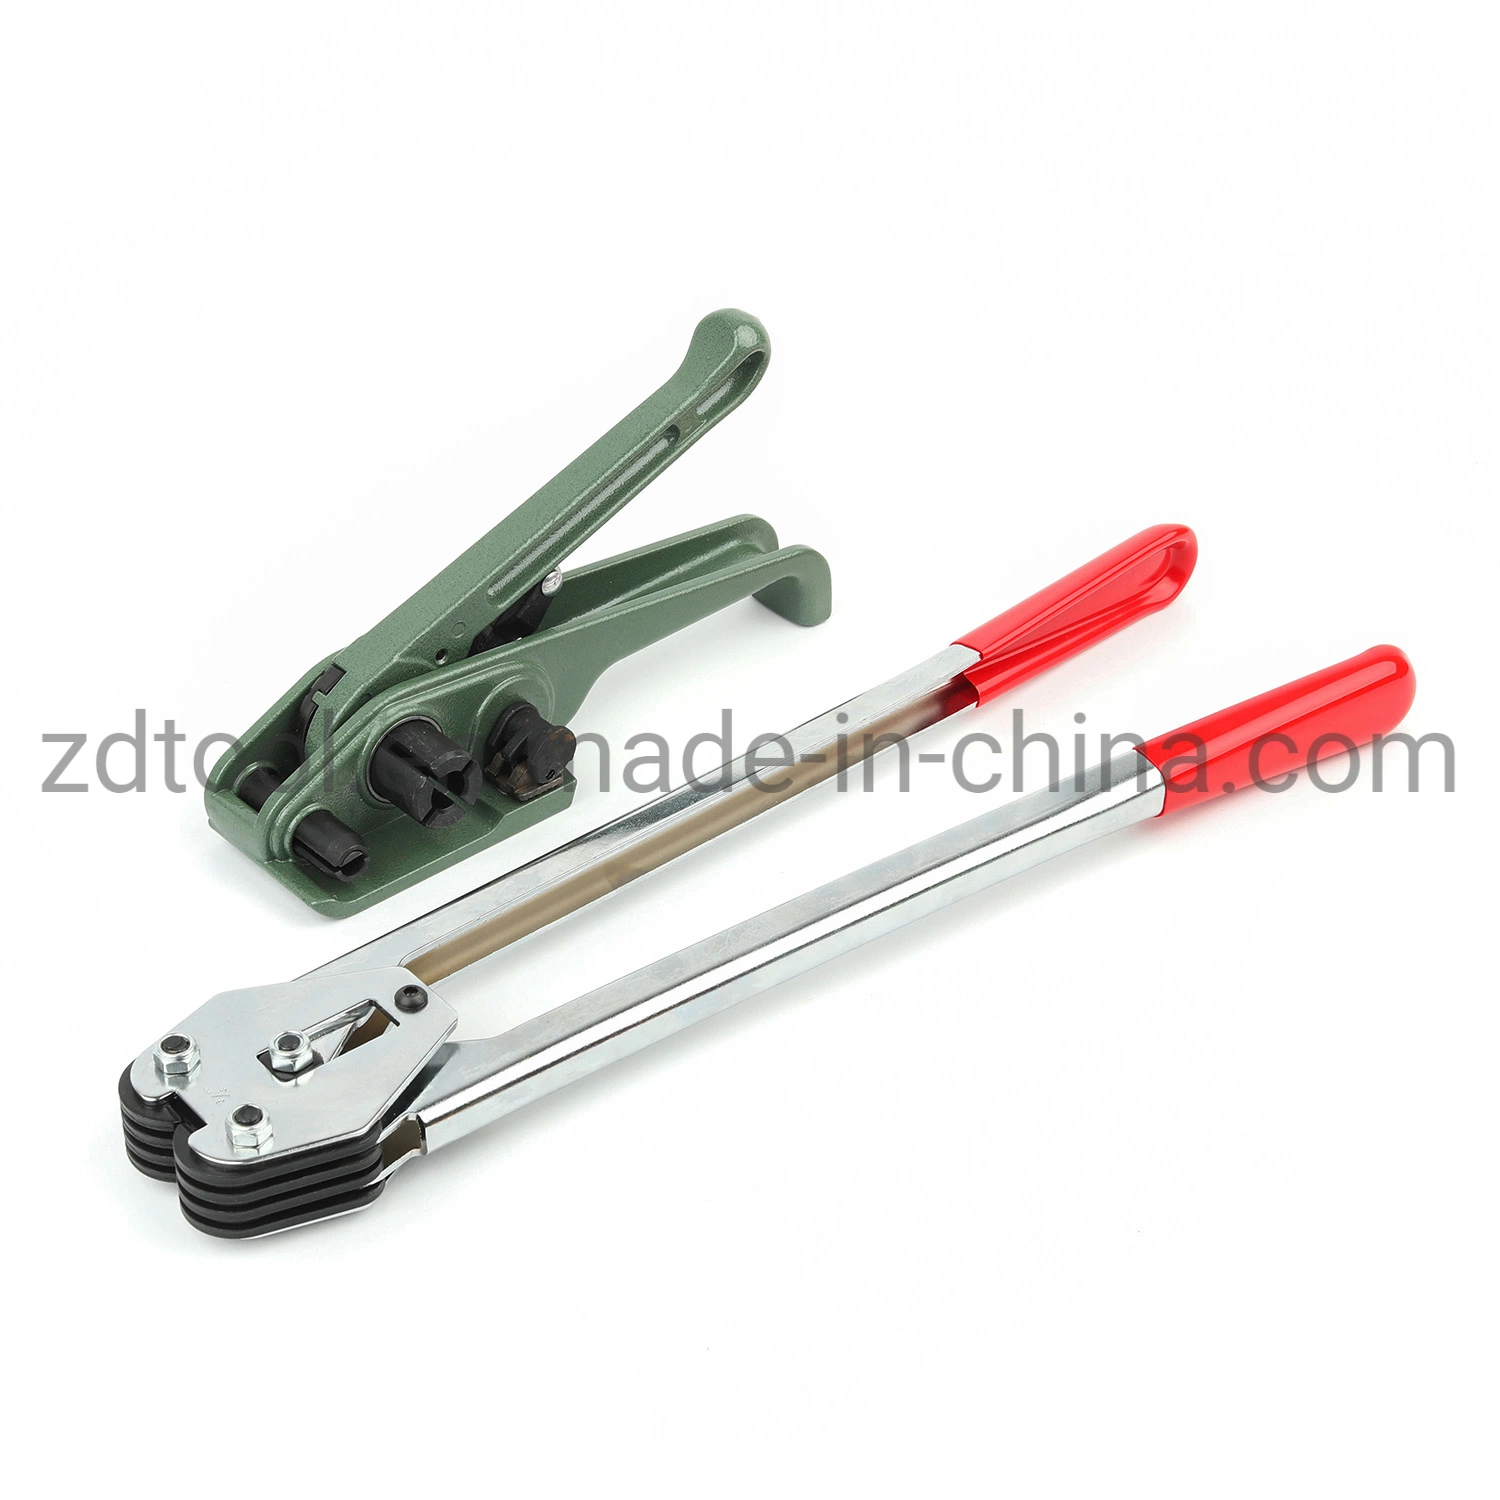 Manual Straps Tensioner, Hand Held Plastic Strapping Cut Machine, PP Pet Strapping Packaging Tools H19, Packing, Freeshipping (B310)